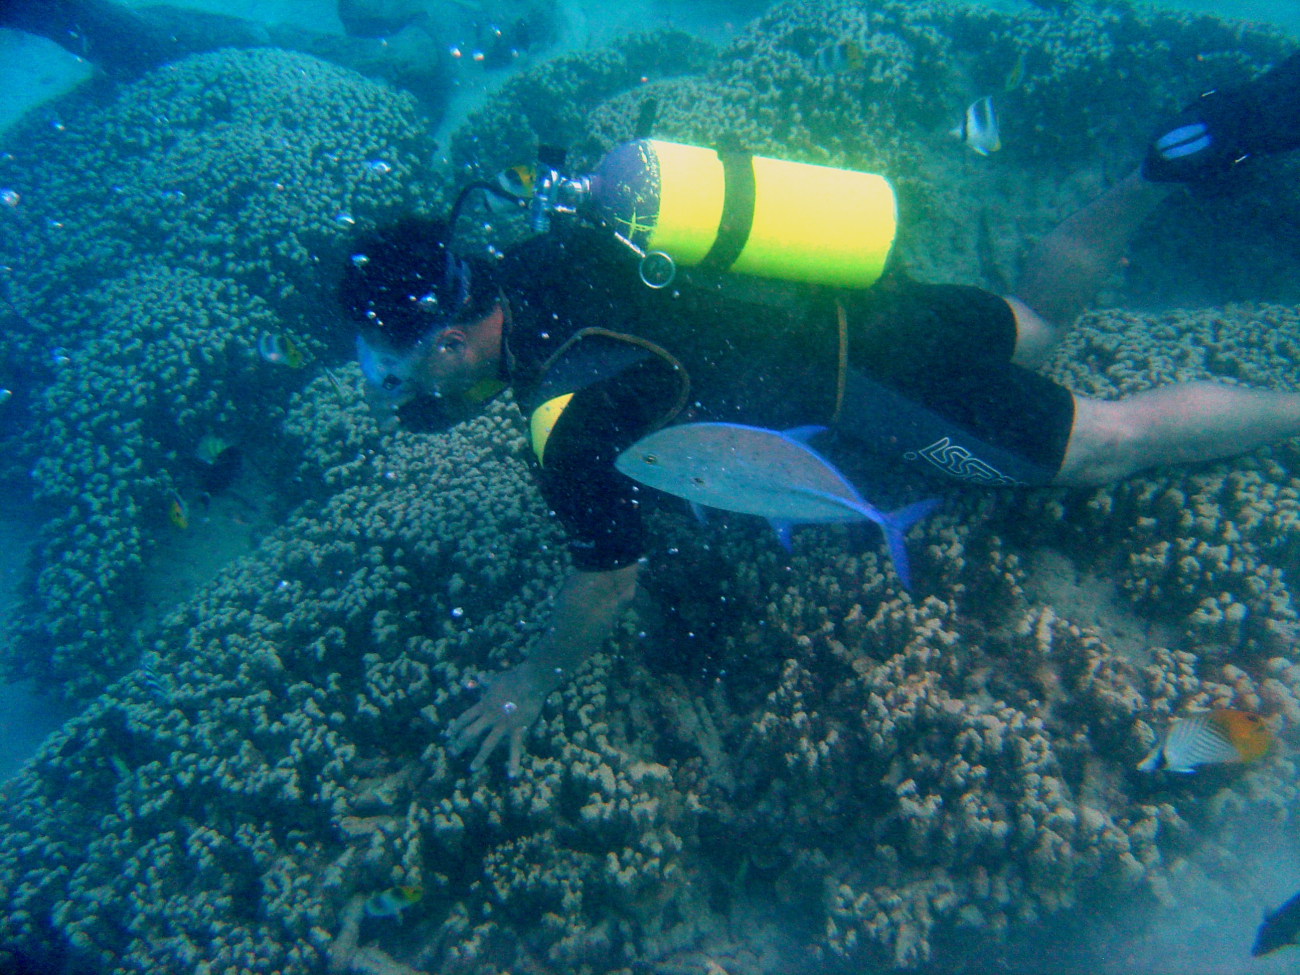 A dive tourist loving a coral reef structure to death as touching can damage orkill delicate coral polyps